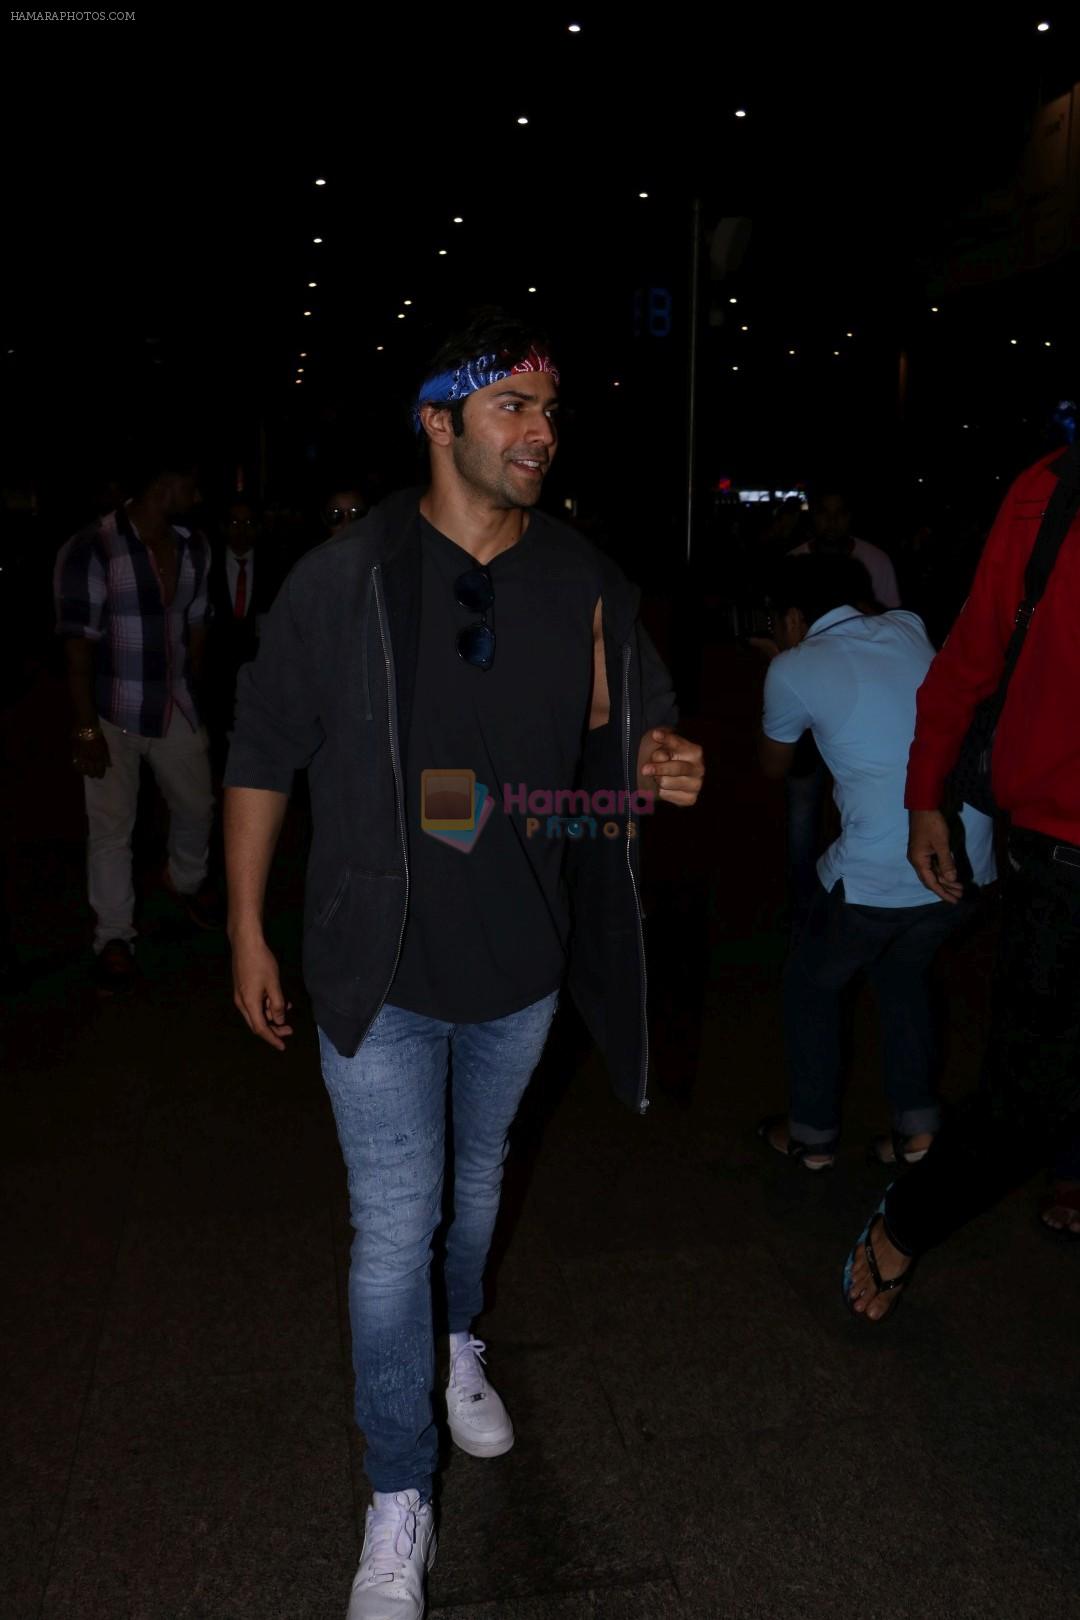 Varun Dhawan Spotted At Airport on 18th July 2017